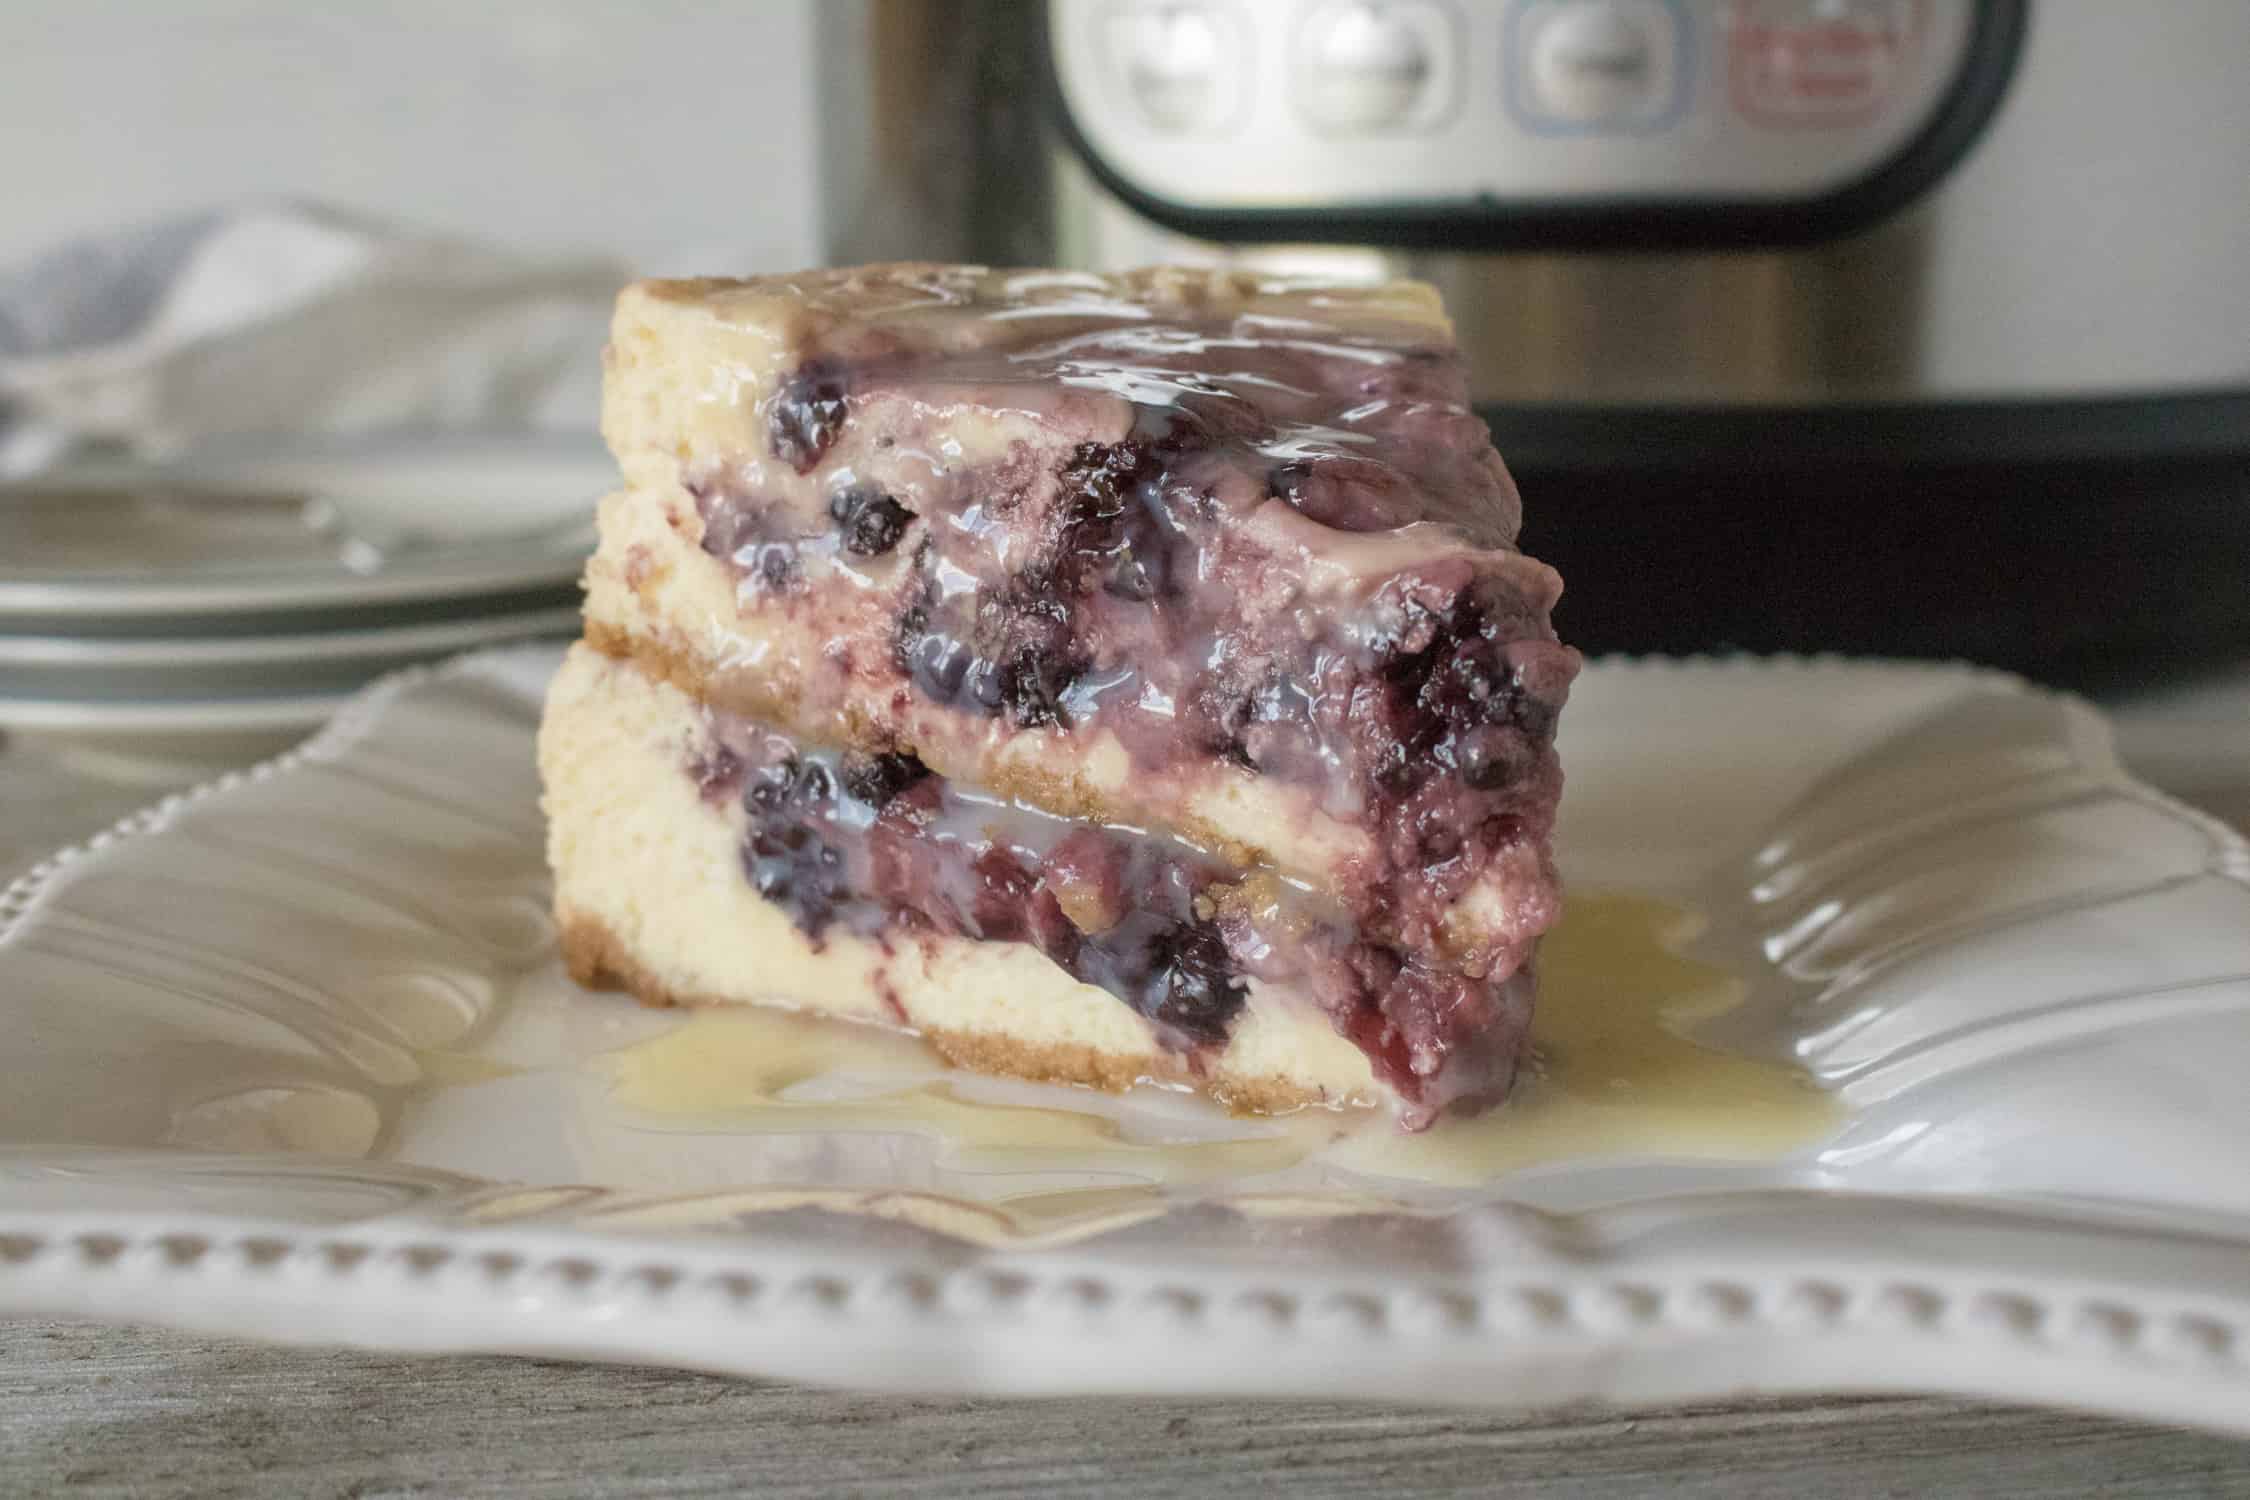 One slide of Instant Pot Blackberry Swirl Cheesecake served on a white plate